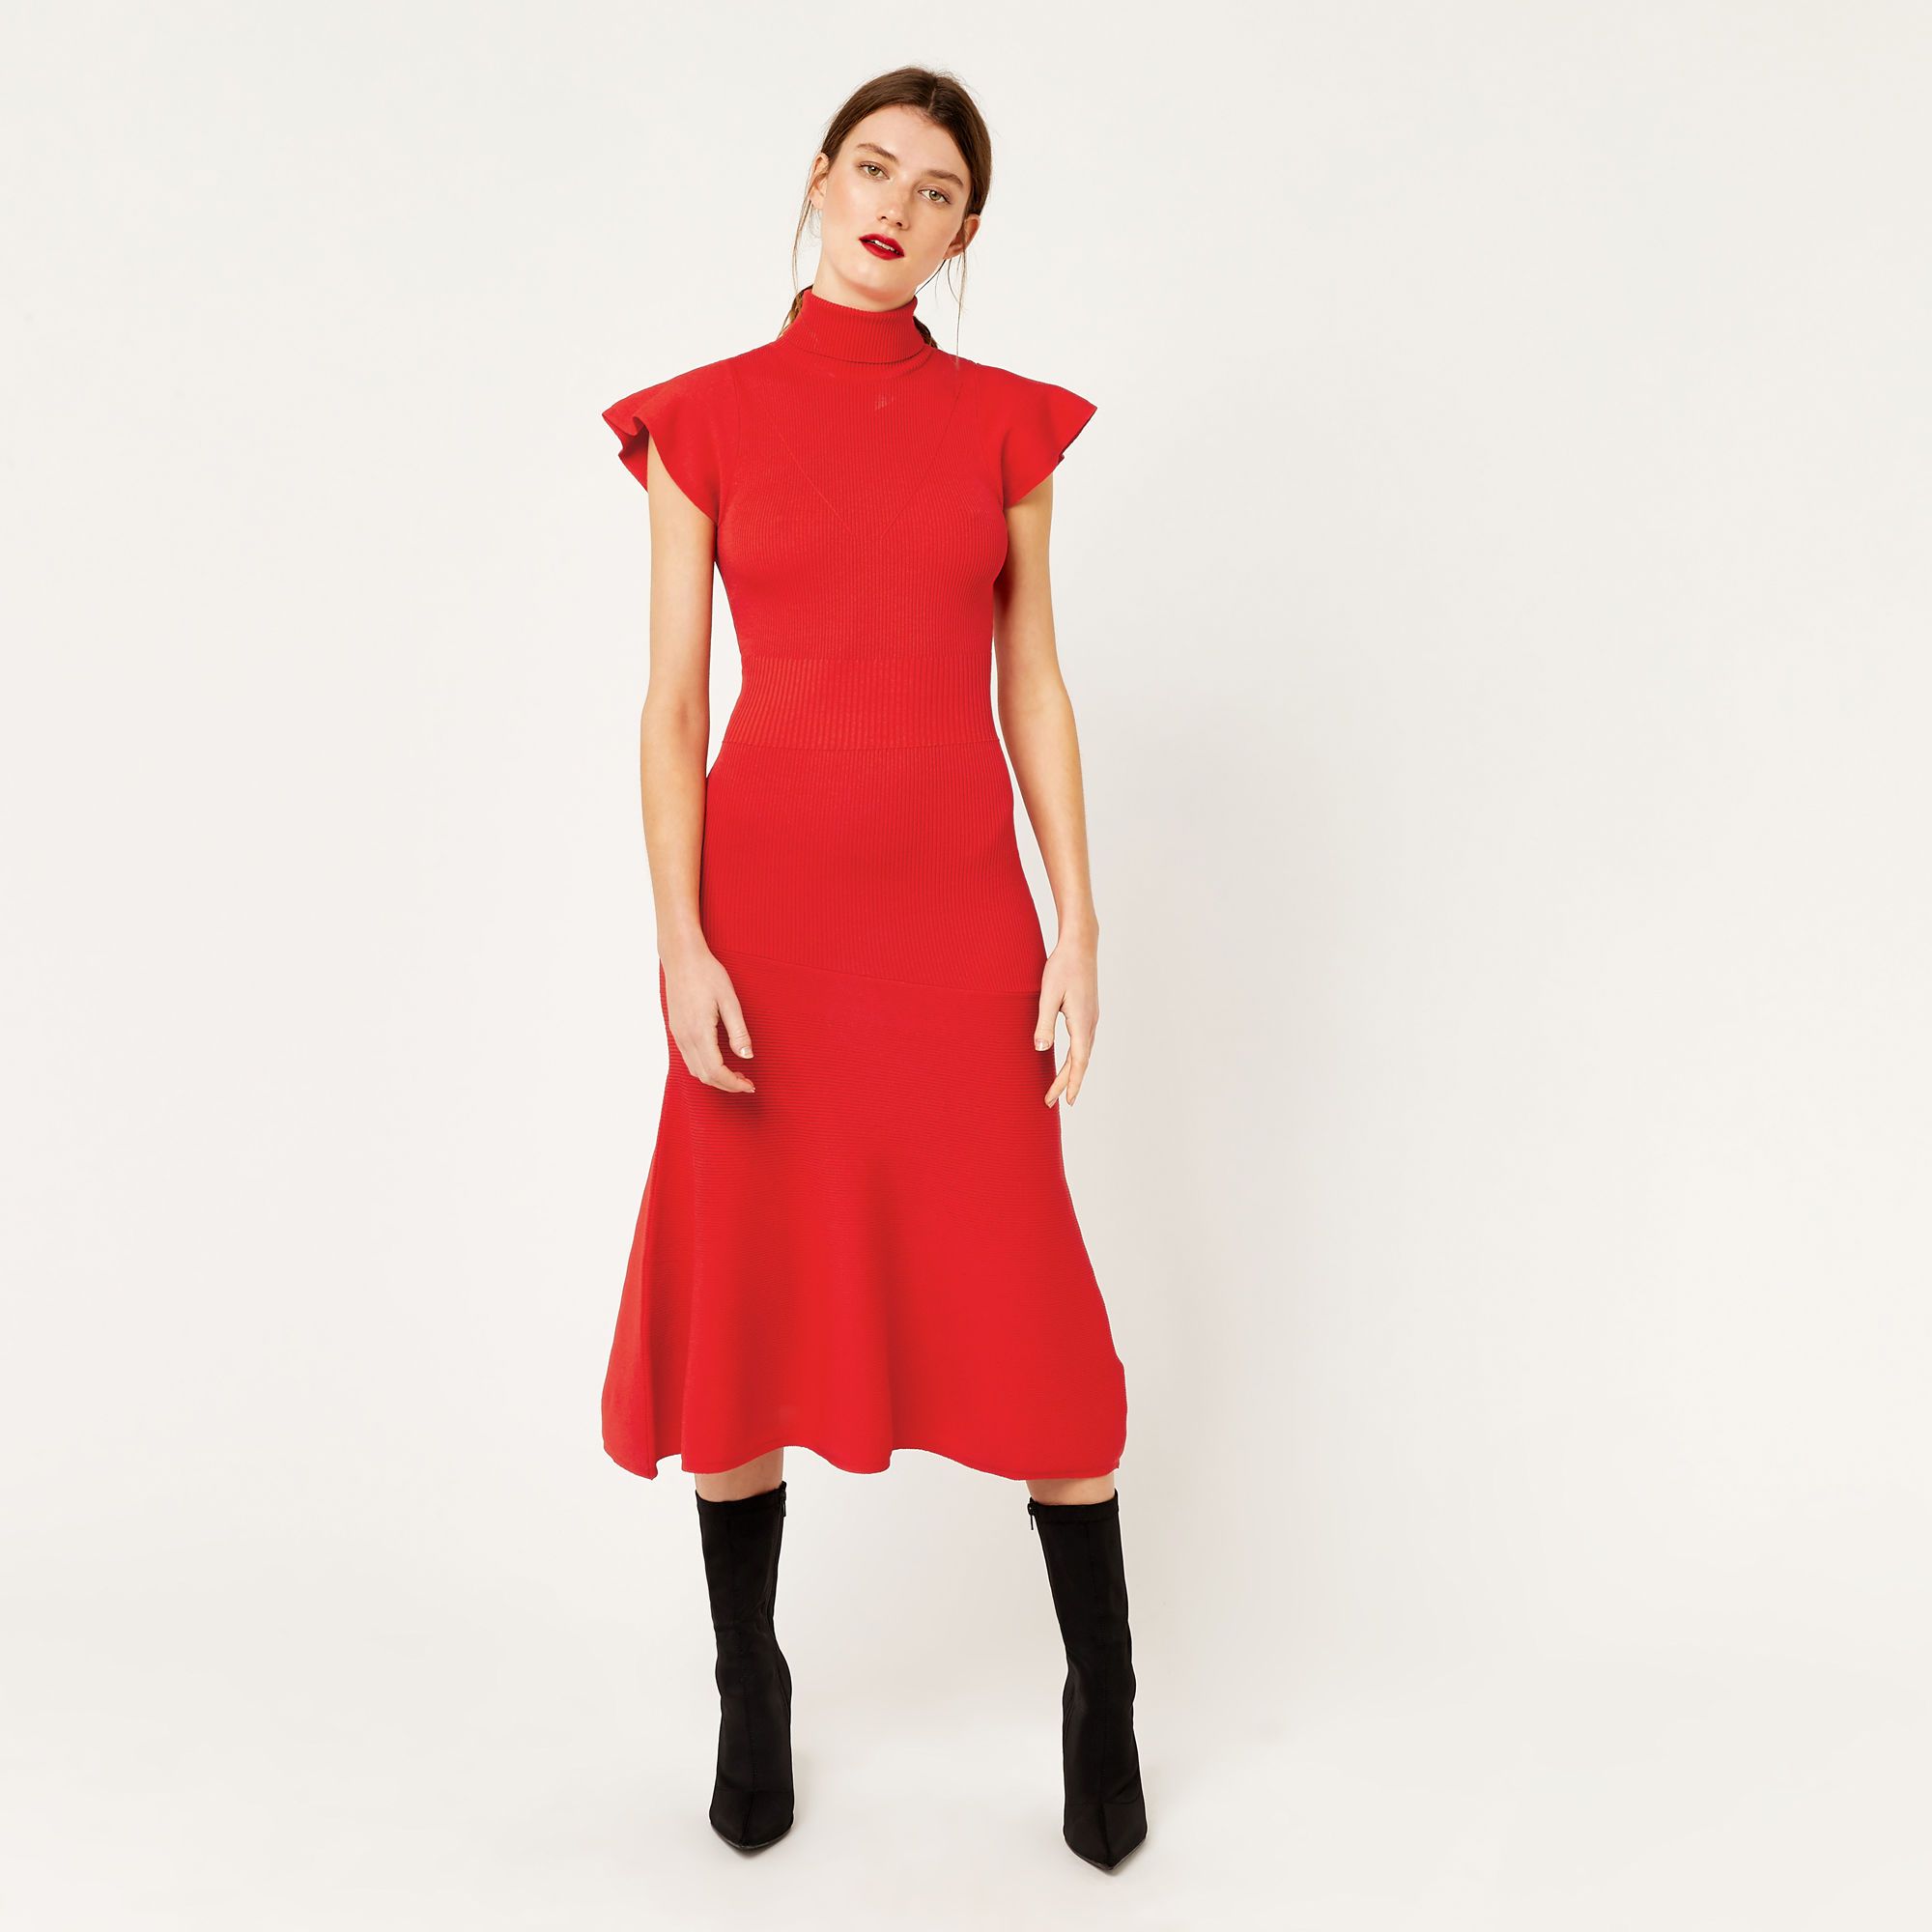 15 reasons to get-on board with the high-neck dress